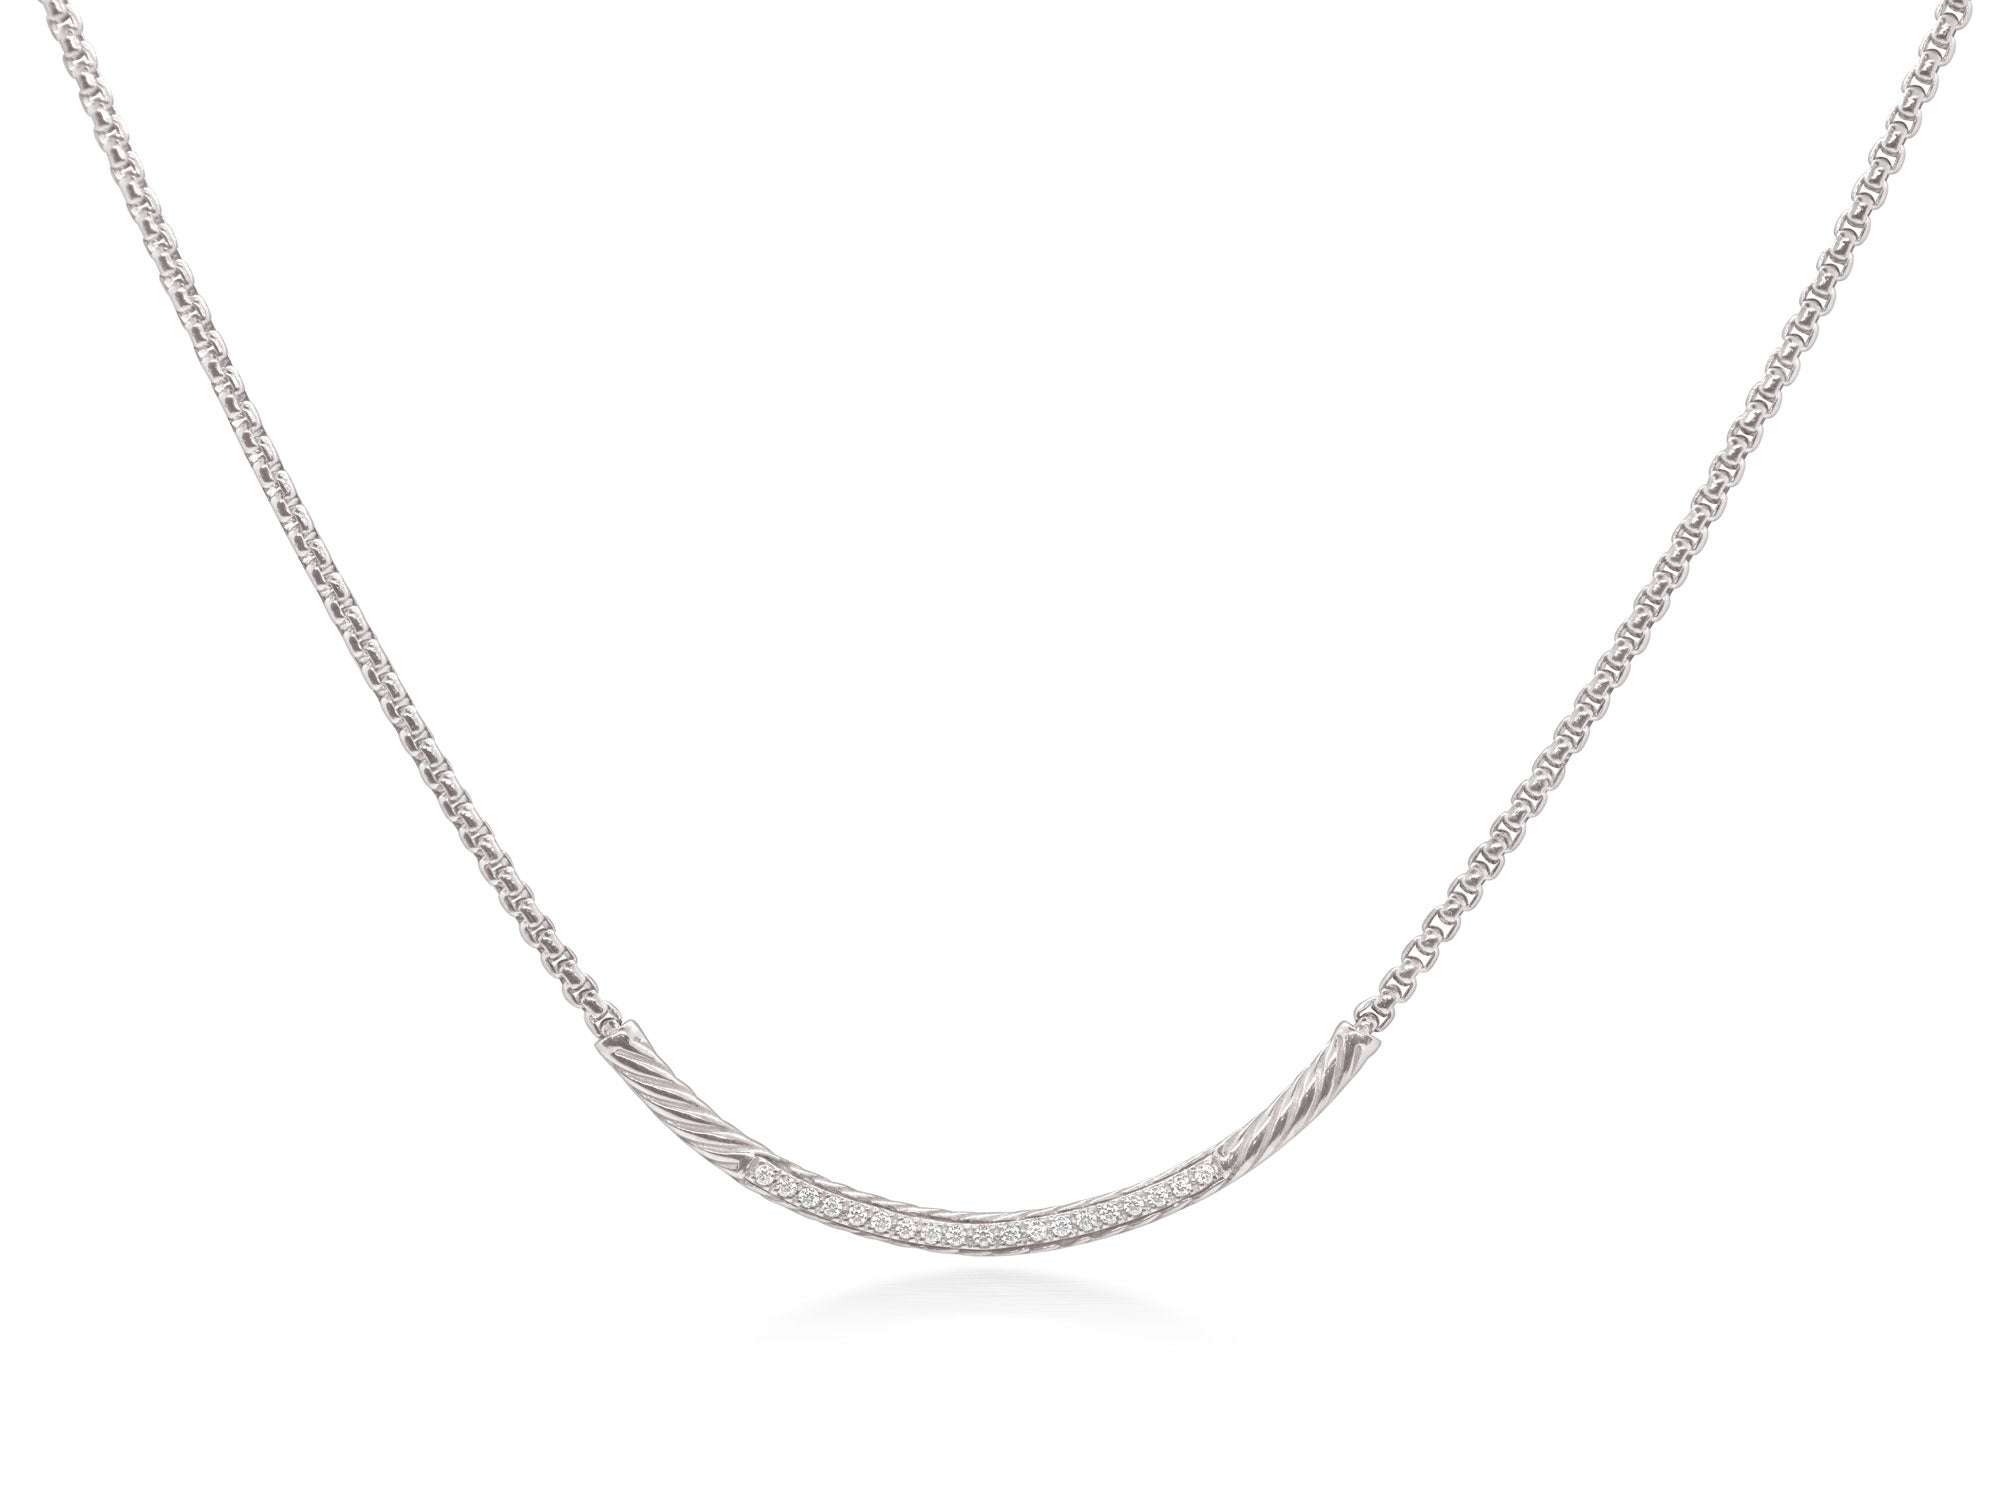 Grey Chain Sonrisa Necklace with 14KT Gold & Diamonds